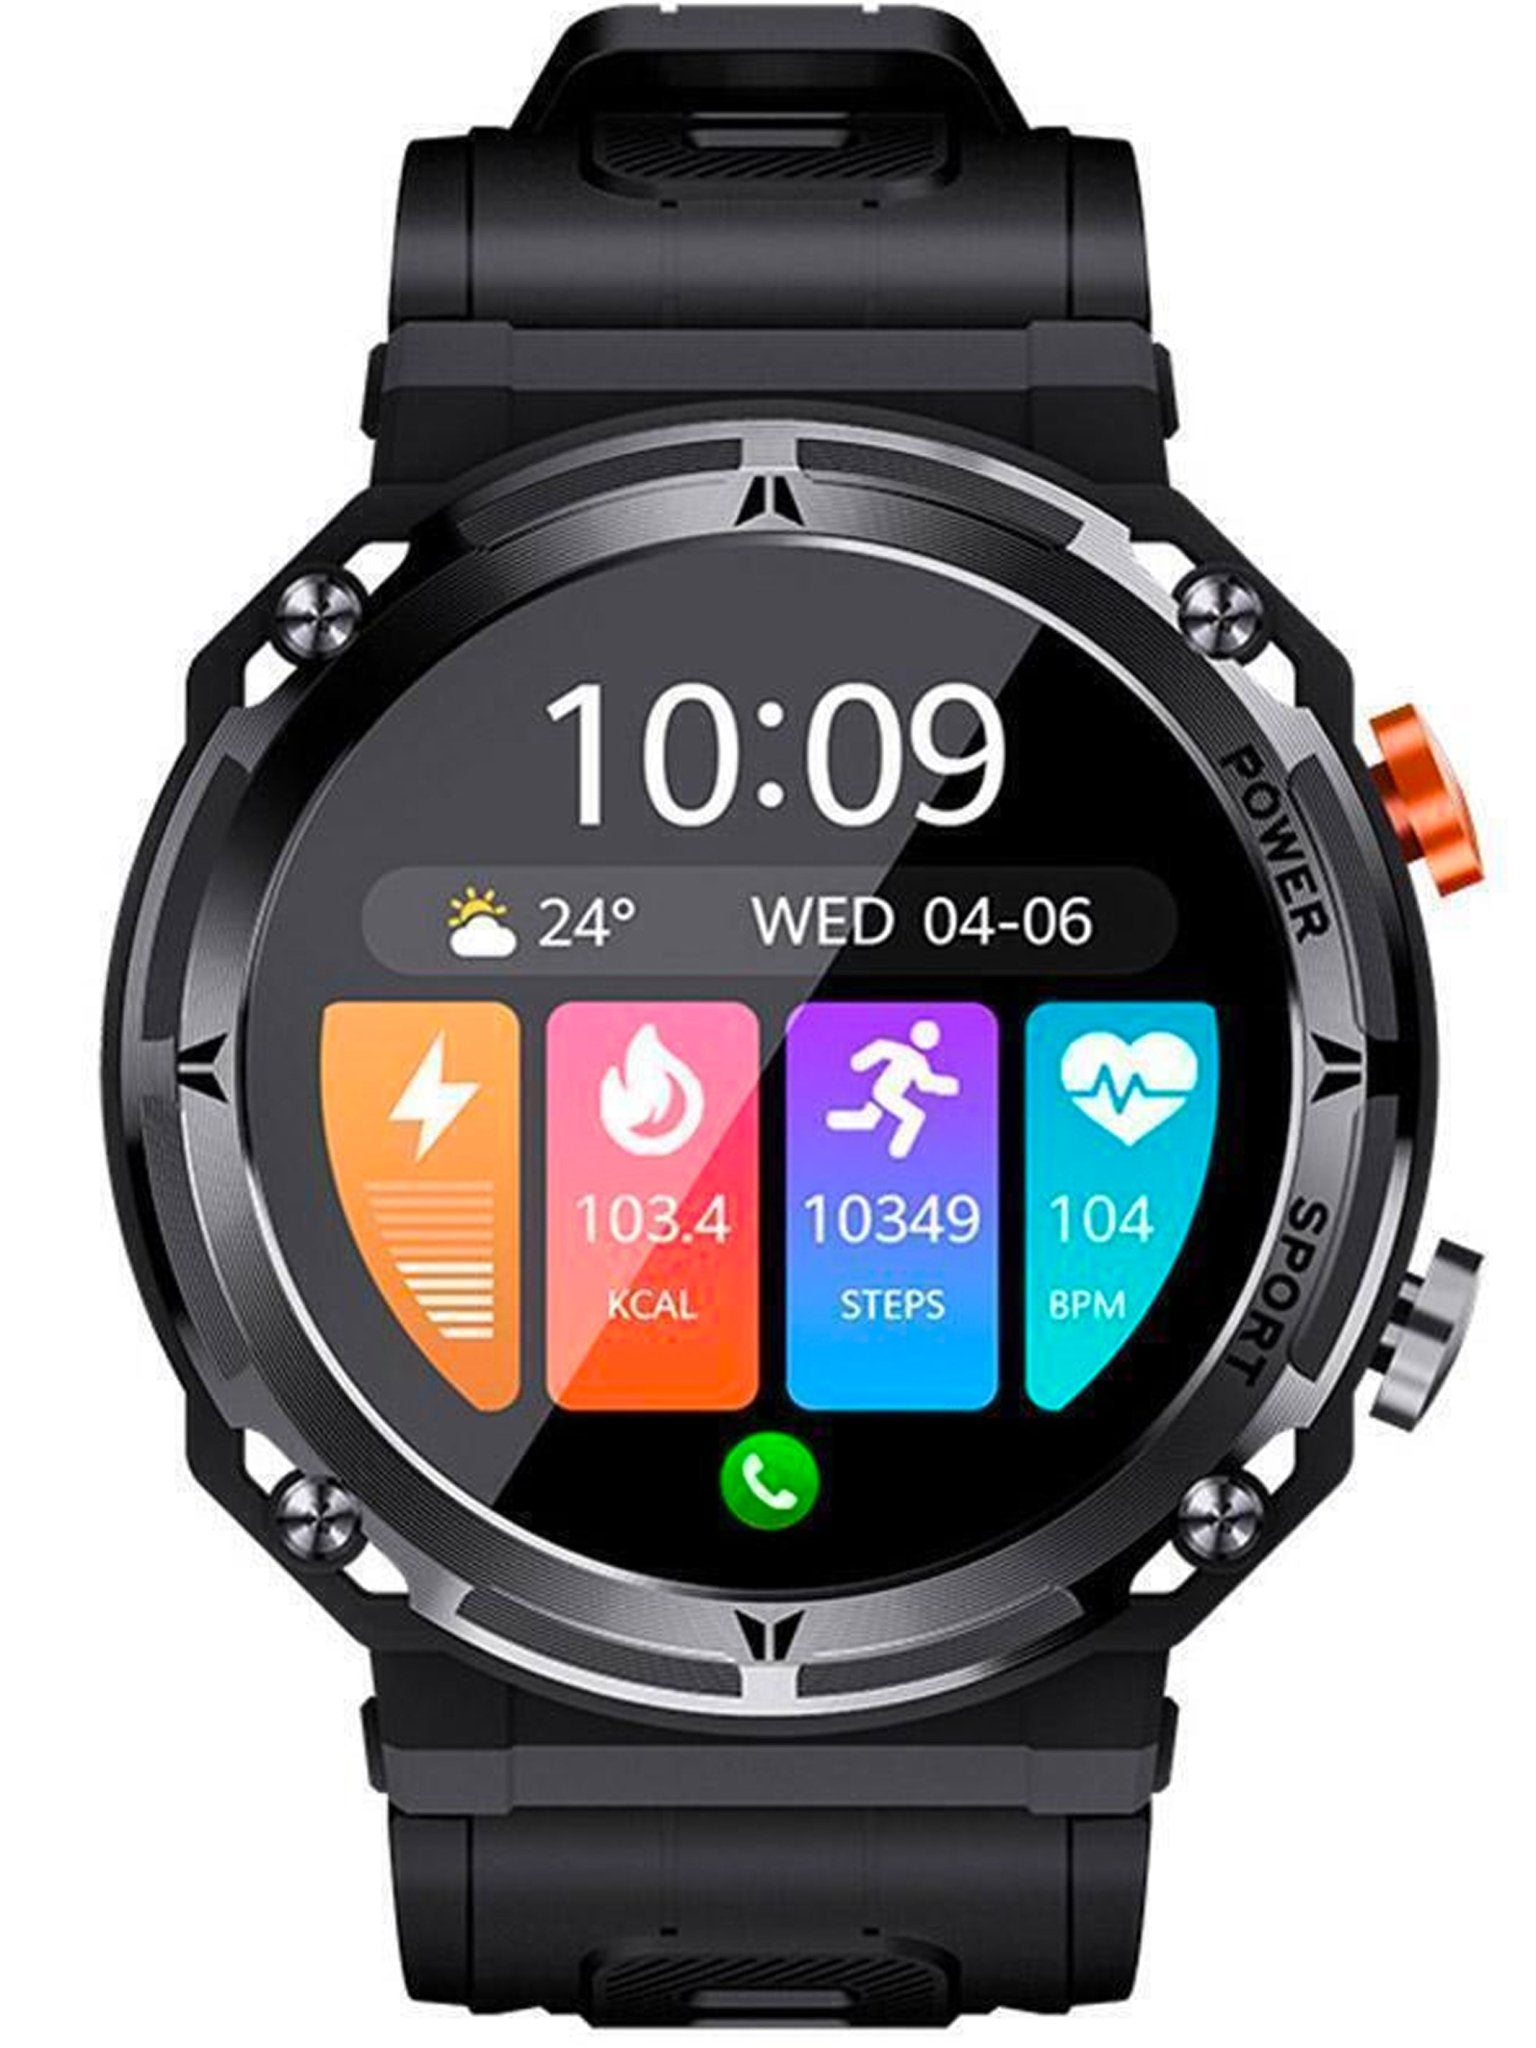 4elementsclothingTelsaTELSA UK - Smart Watch Waterproof T4EC Alloy military style mens Sports & fitness digital Watch with Touch Screen display, Fitness Watch, Heart Rate, Step counter Smart Watch for men IOS & AndroidWatch5060976970382